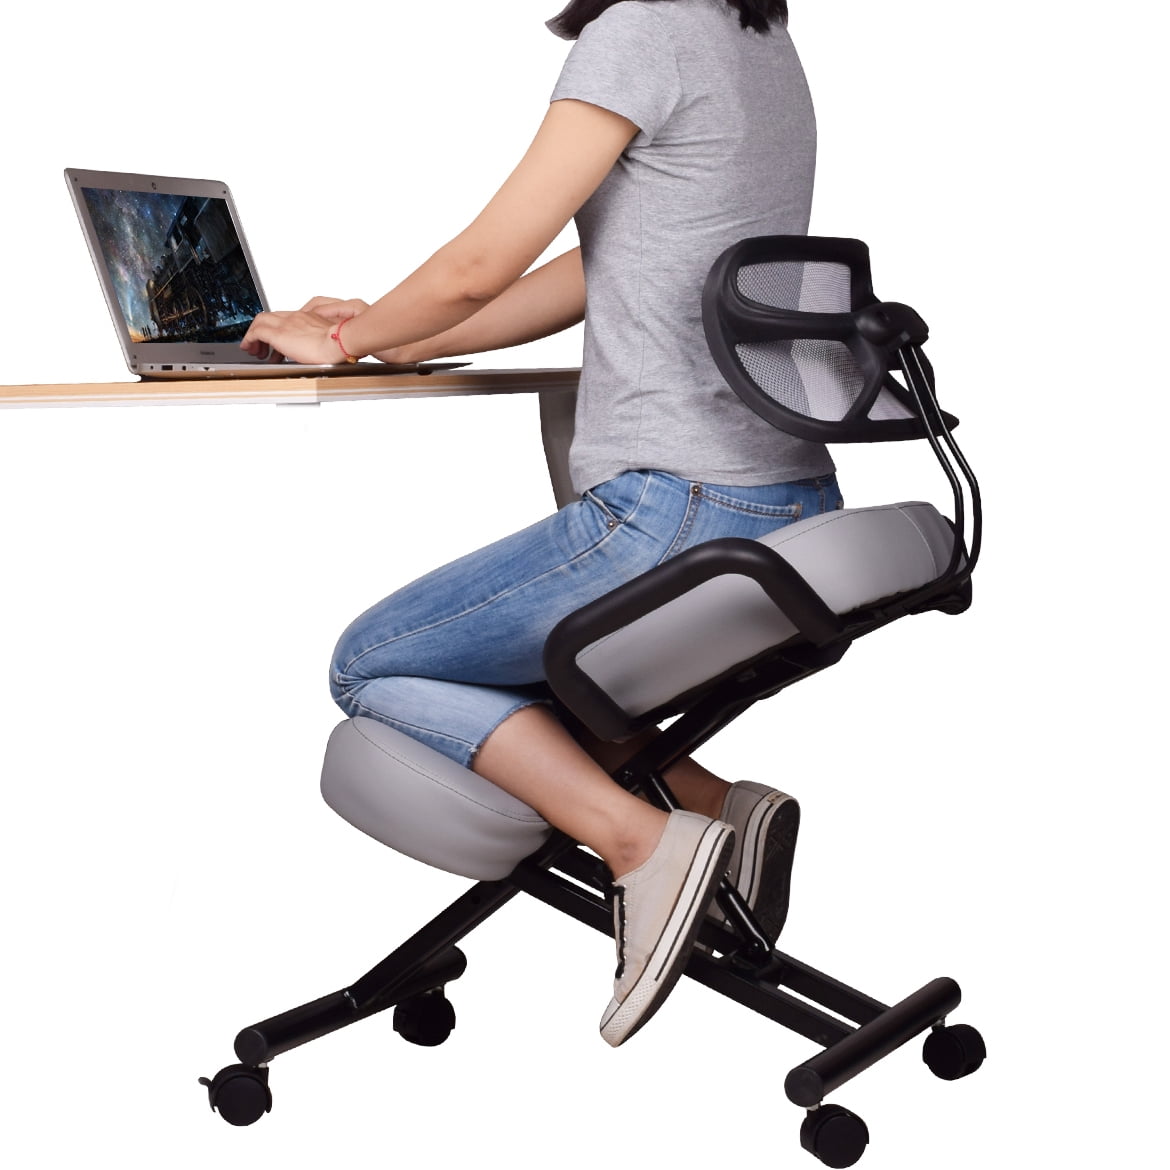 DRAGONN (By VIVO) Ergonomic Kneeling Chair with Back Support for Home and Office, Angled Posture